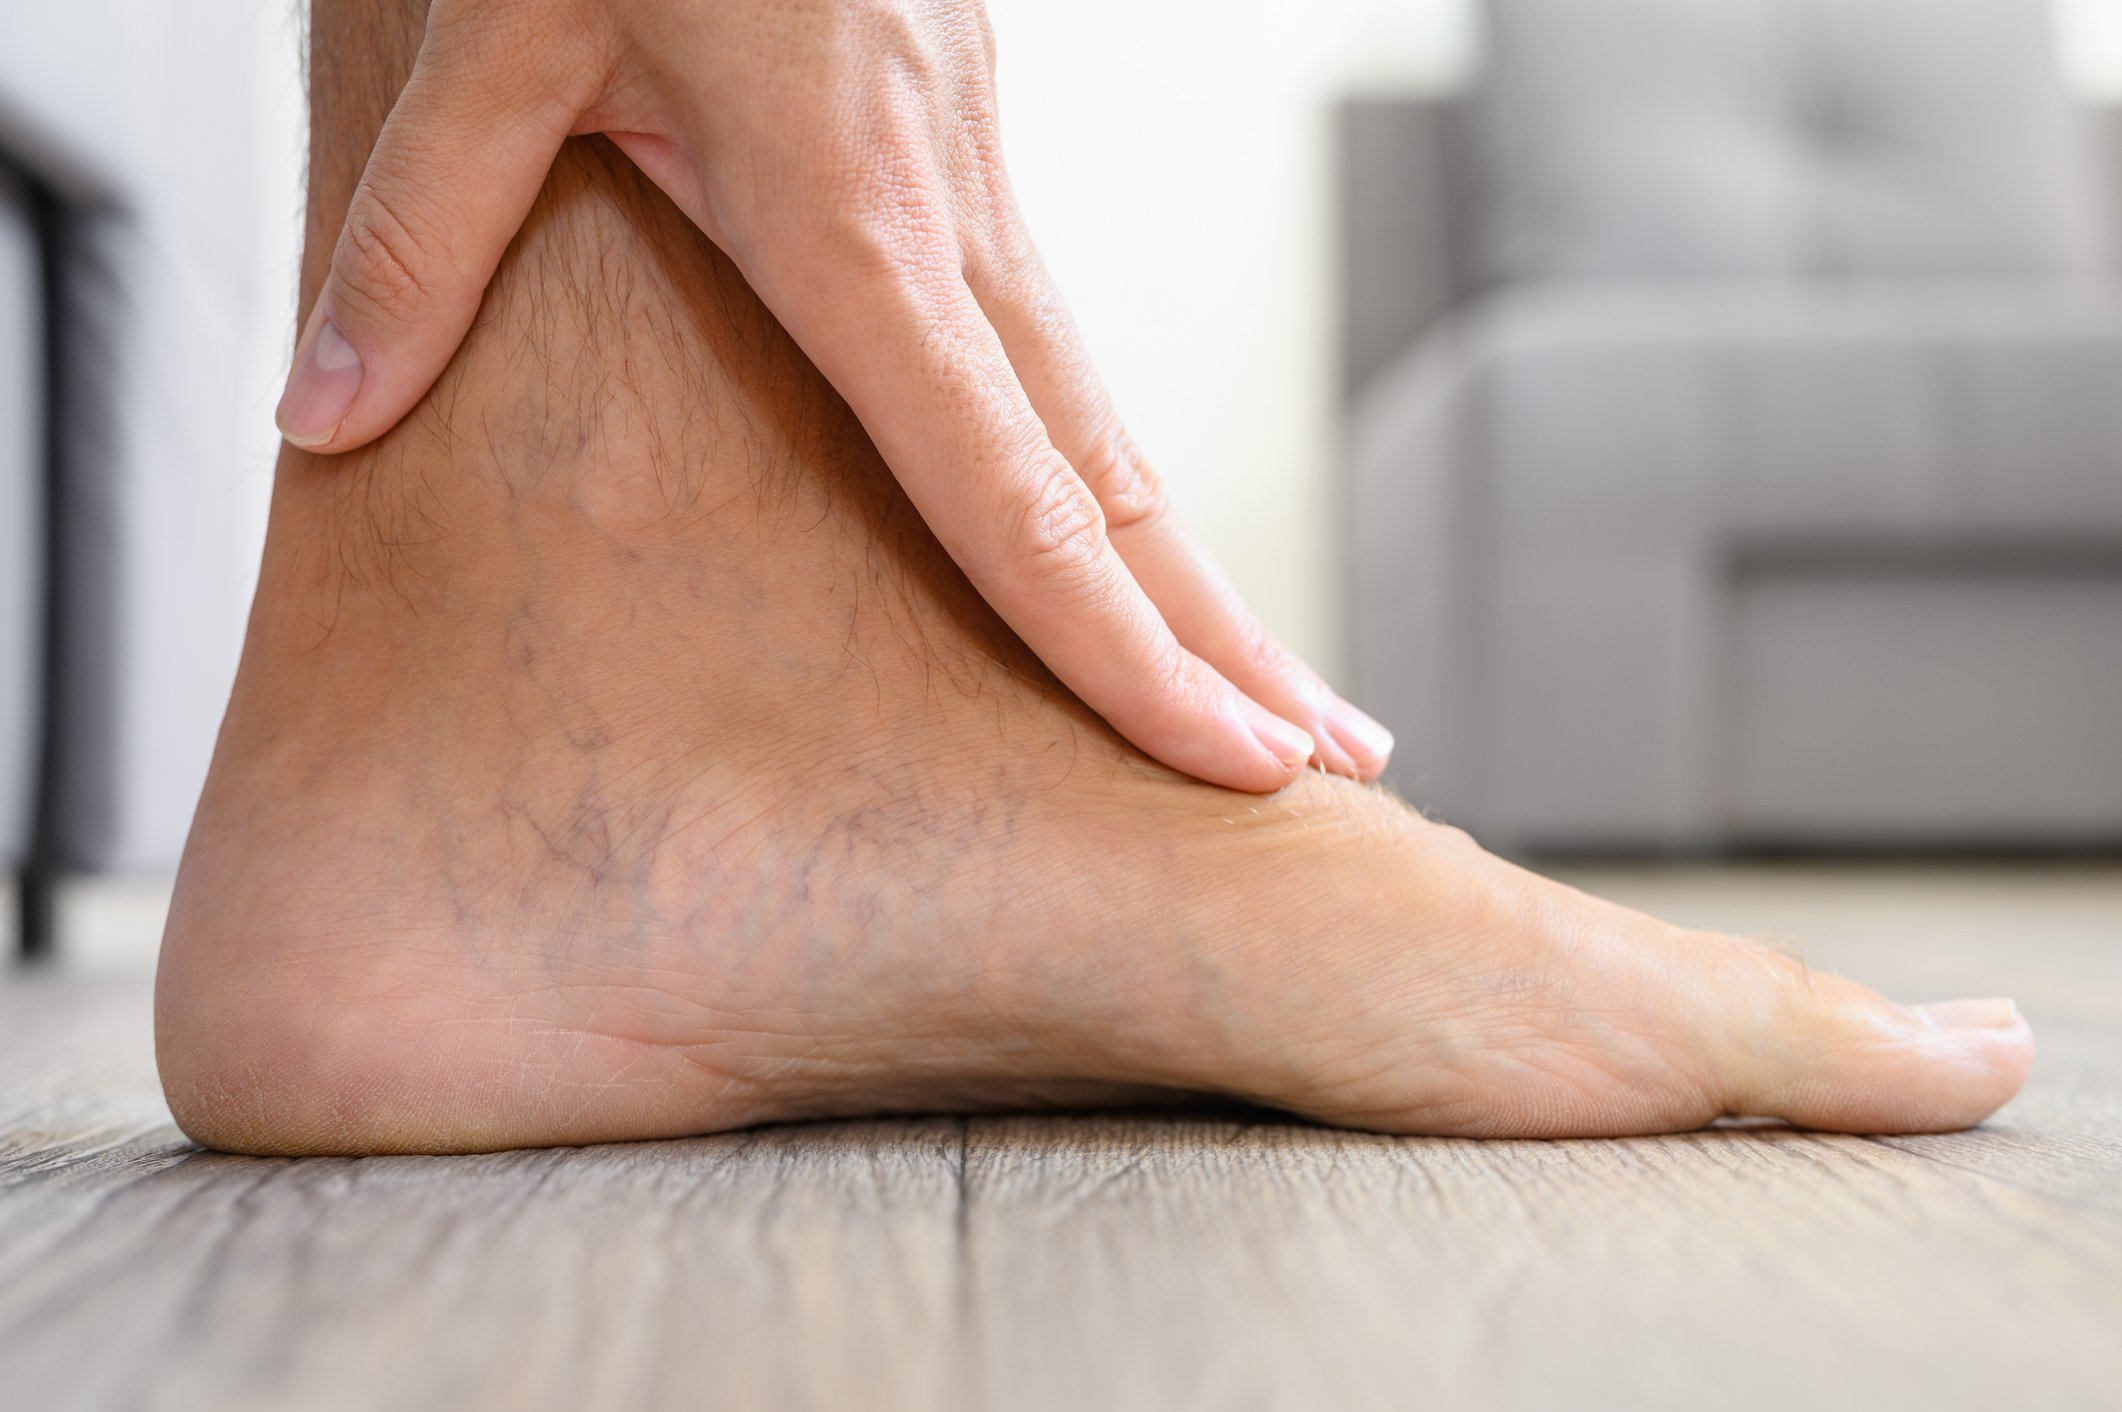 Visible veins can appear in your feet and lower body.